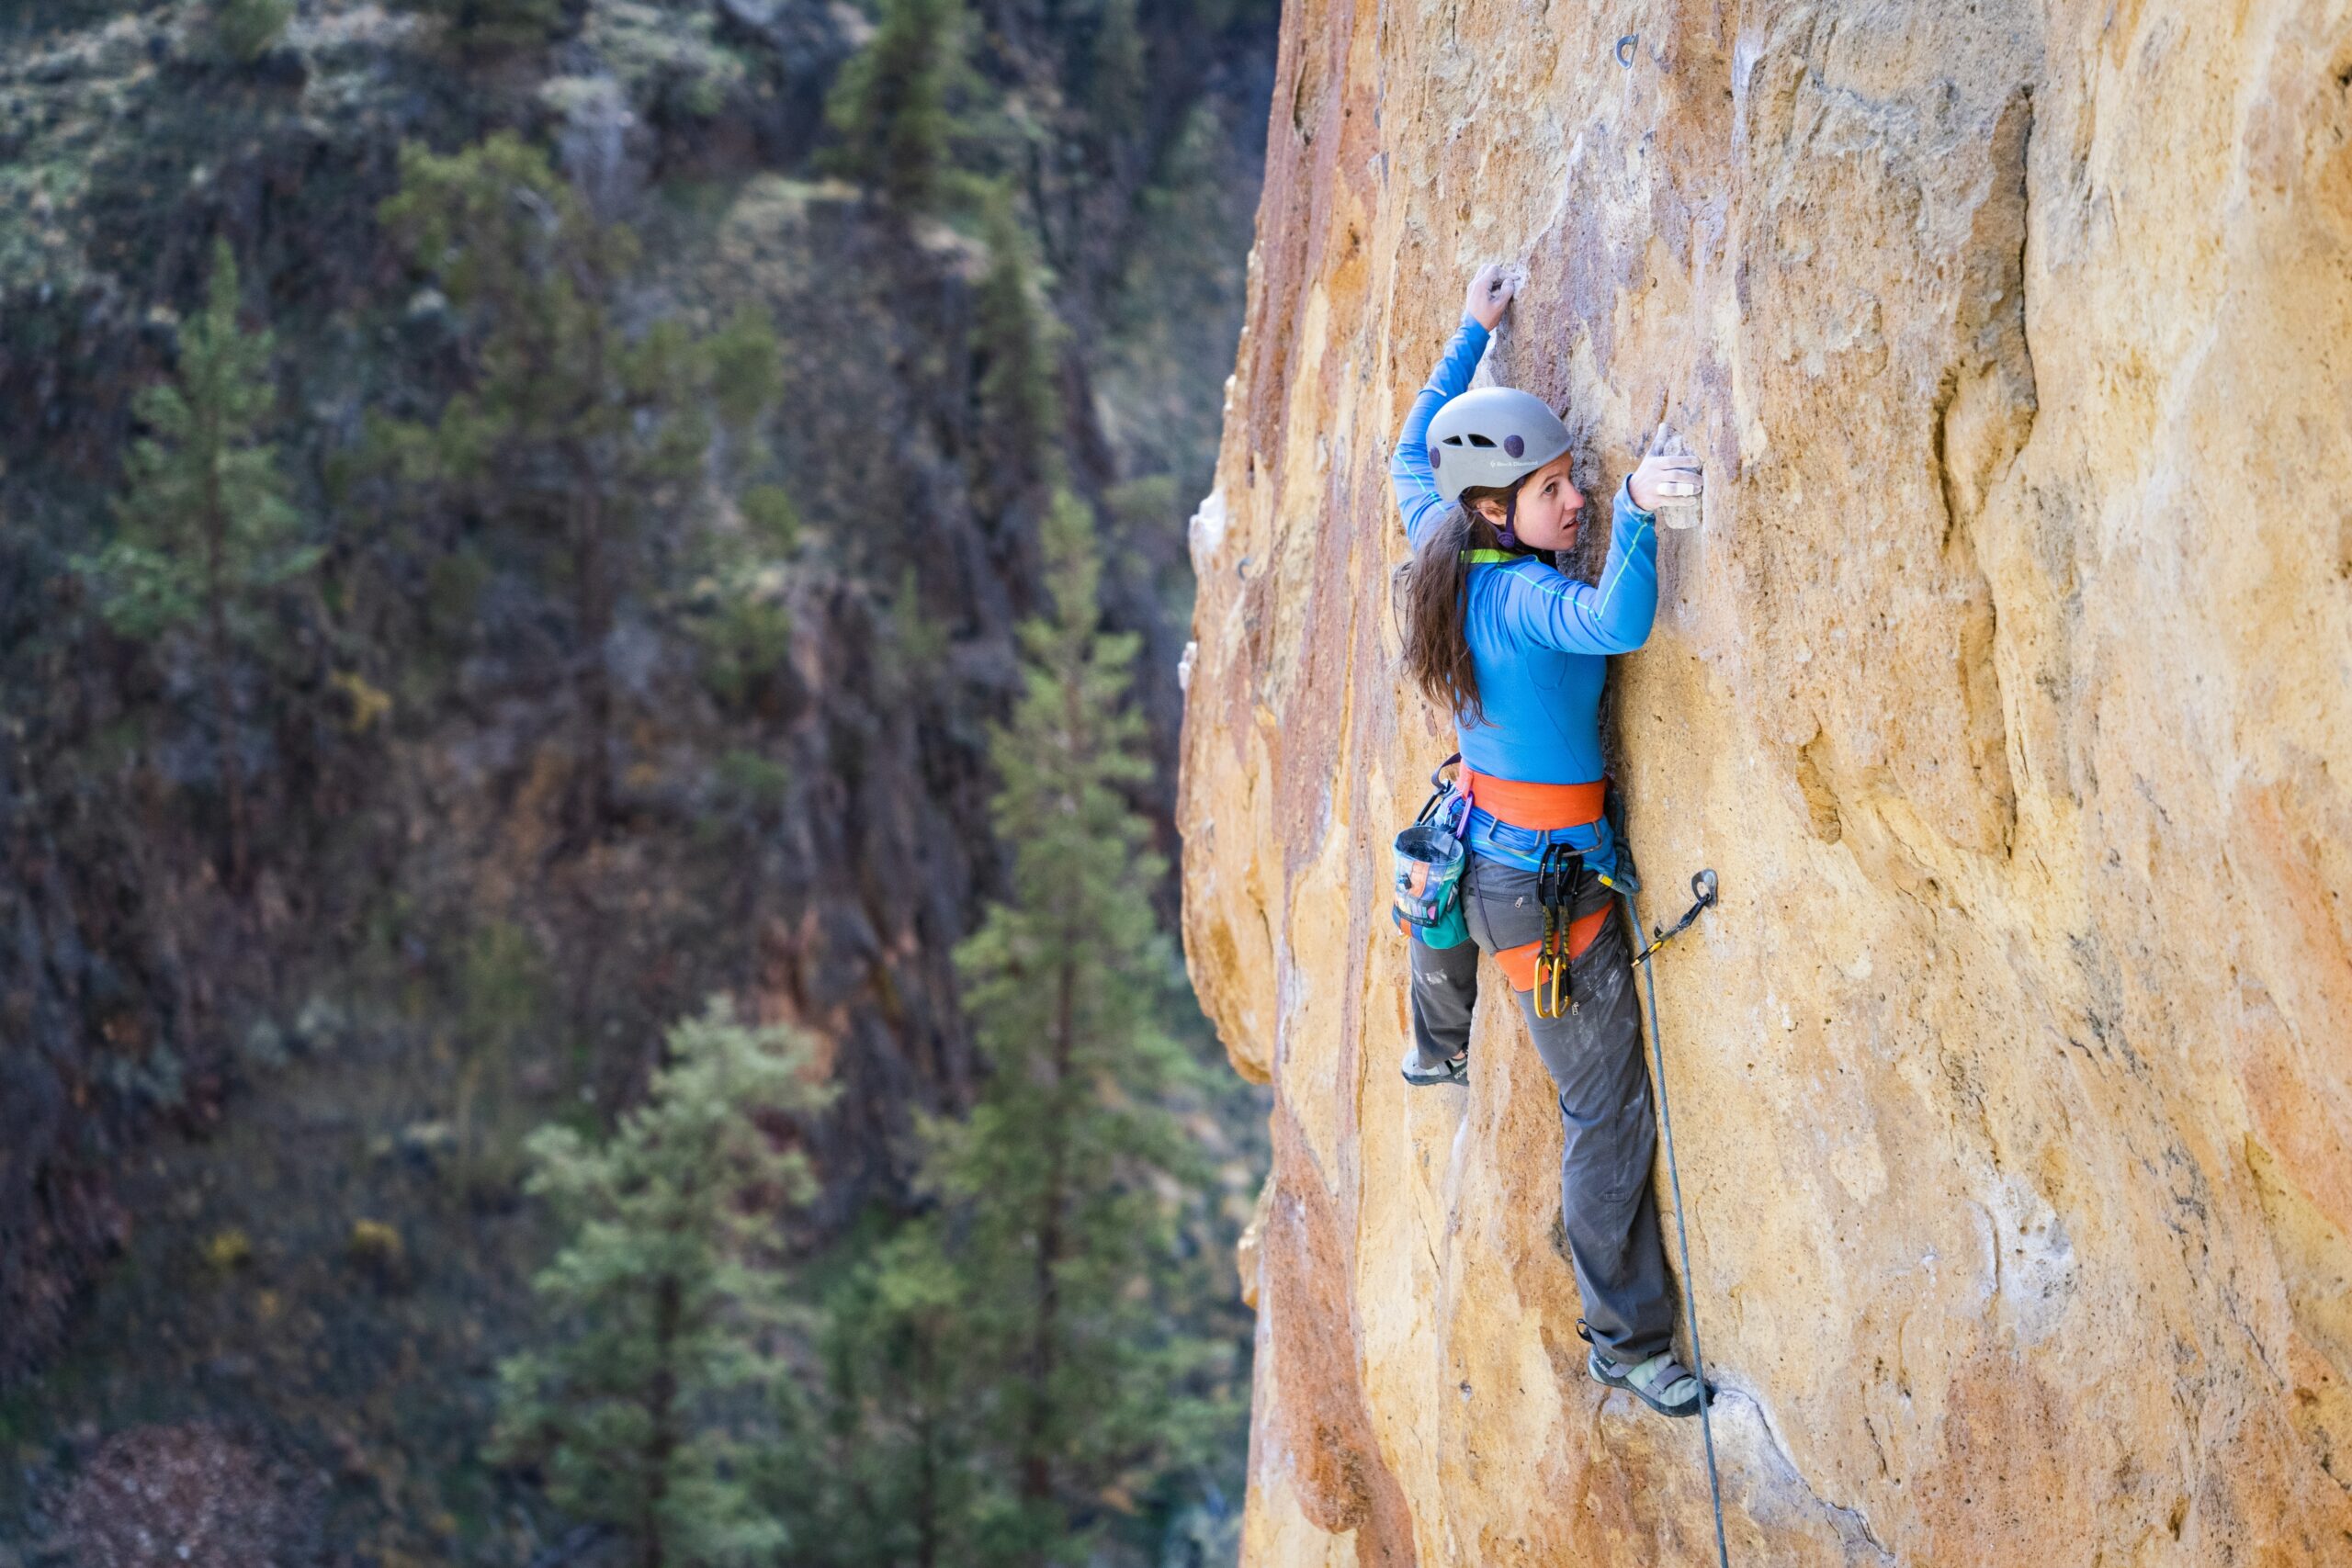 The 8 essential pieces of equipment you need to start rock climbing